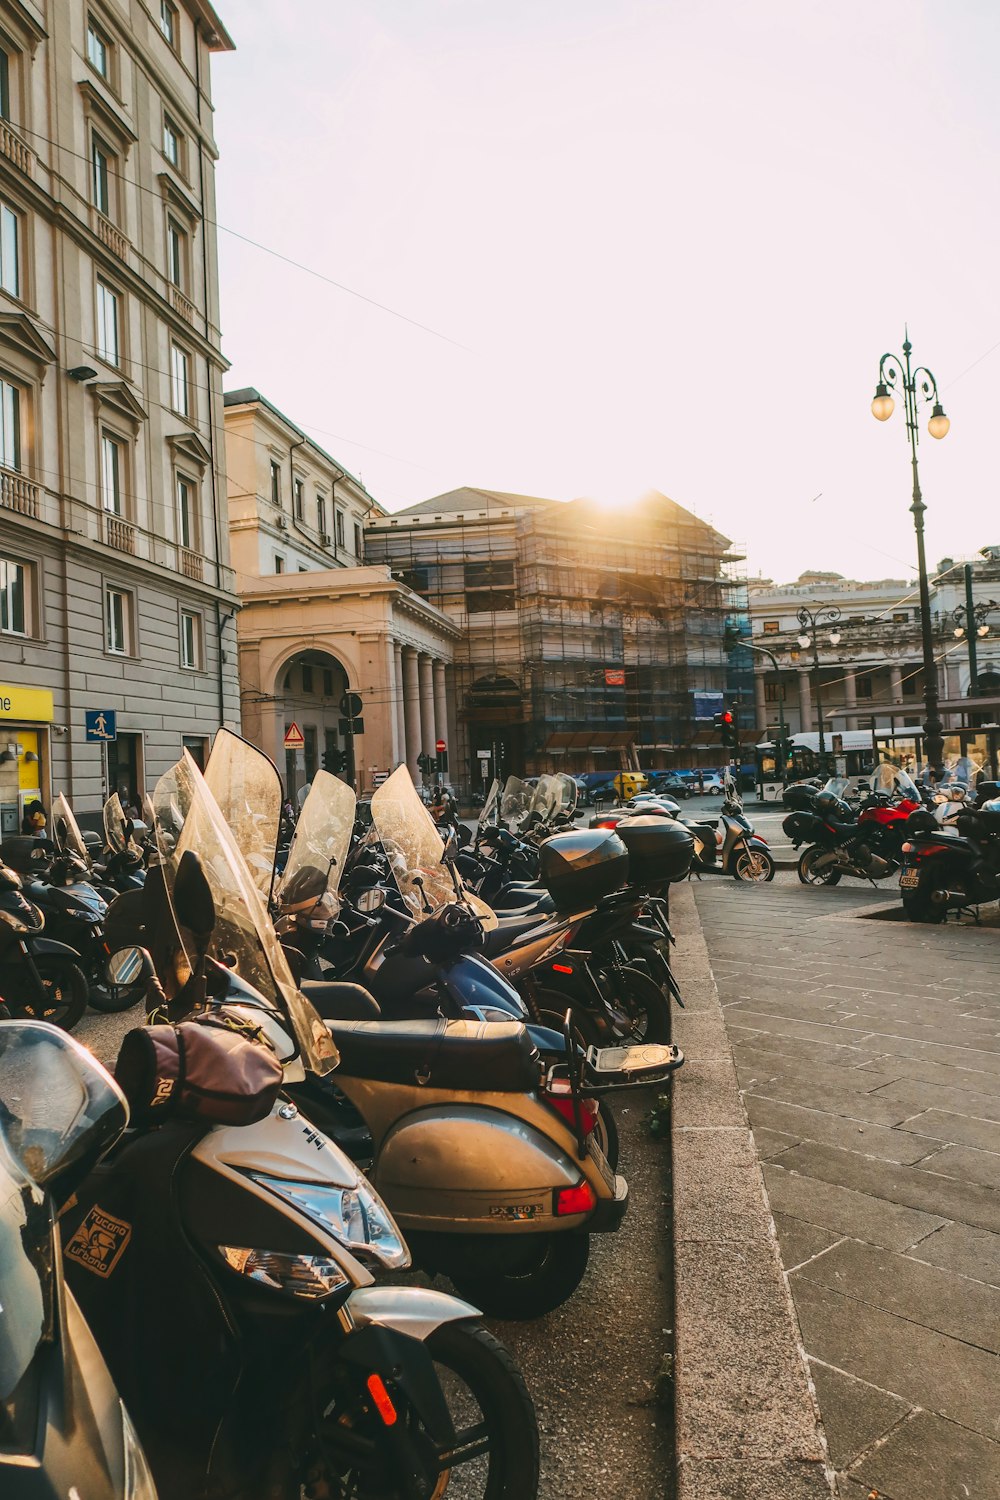 a group of motorcycles parked on the side of a street